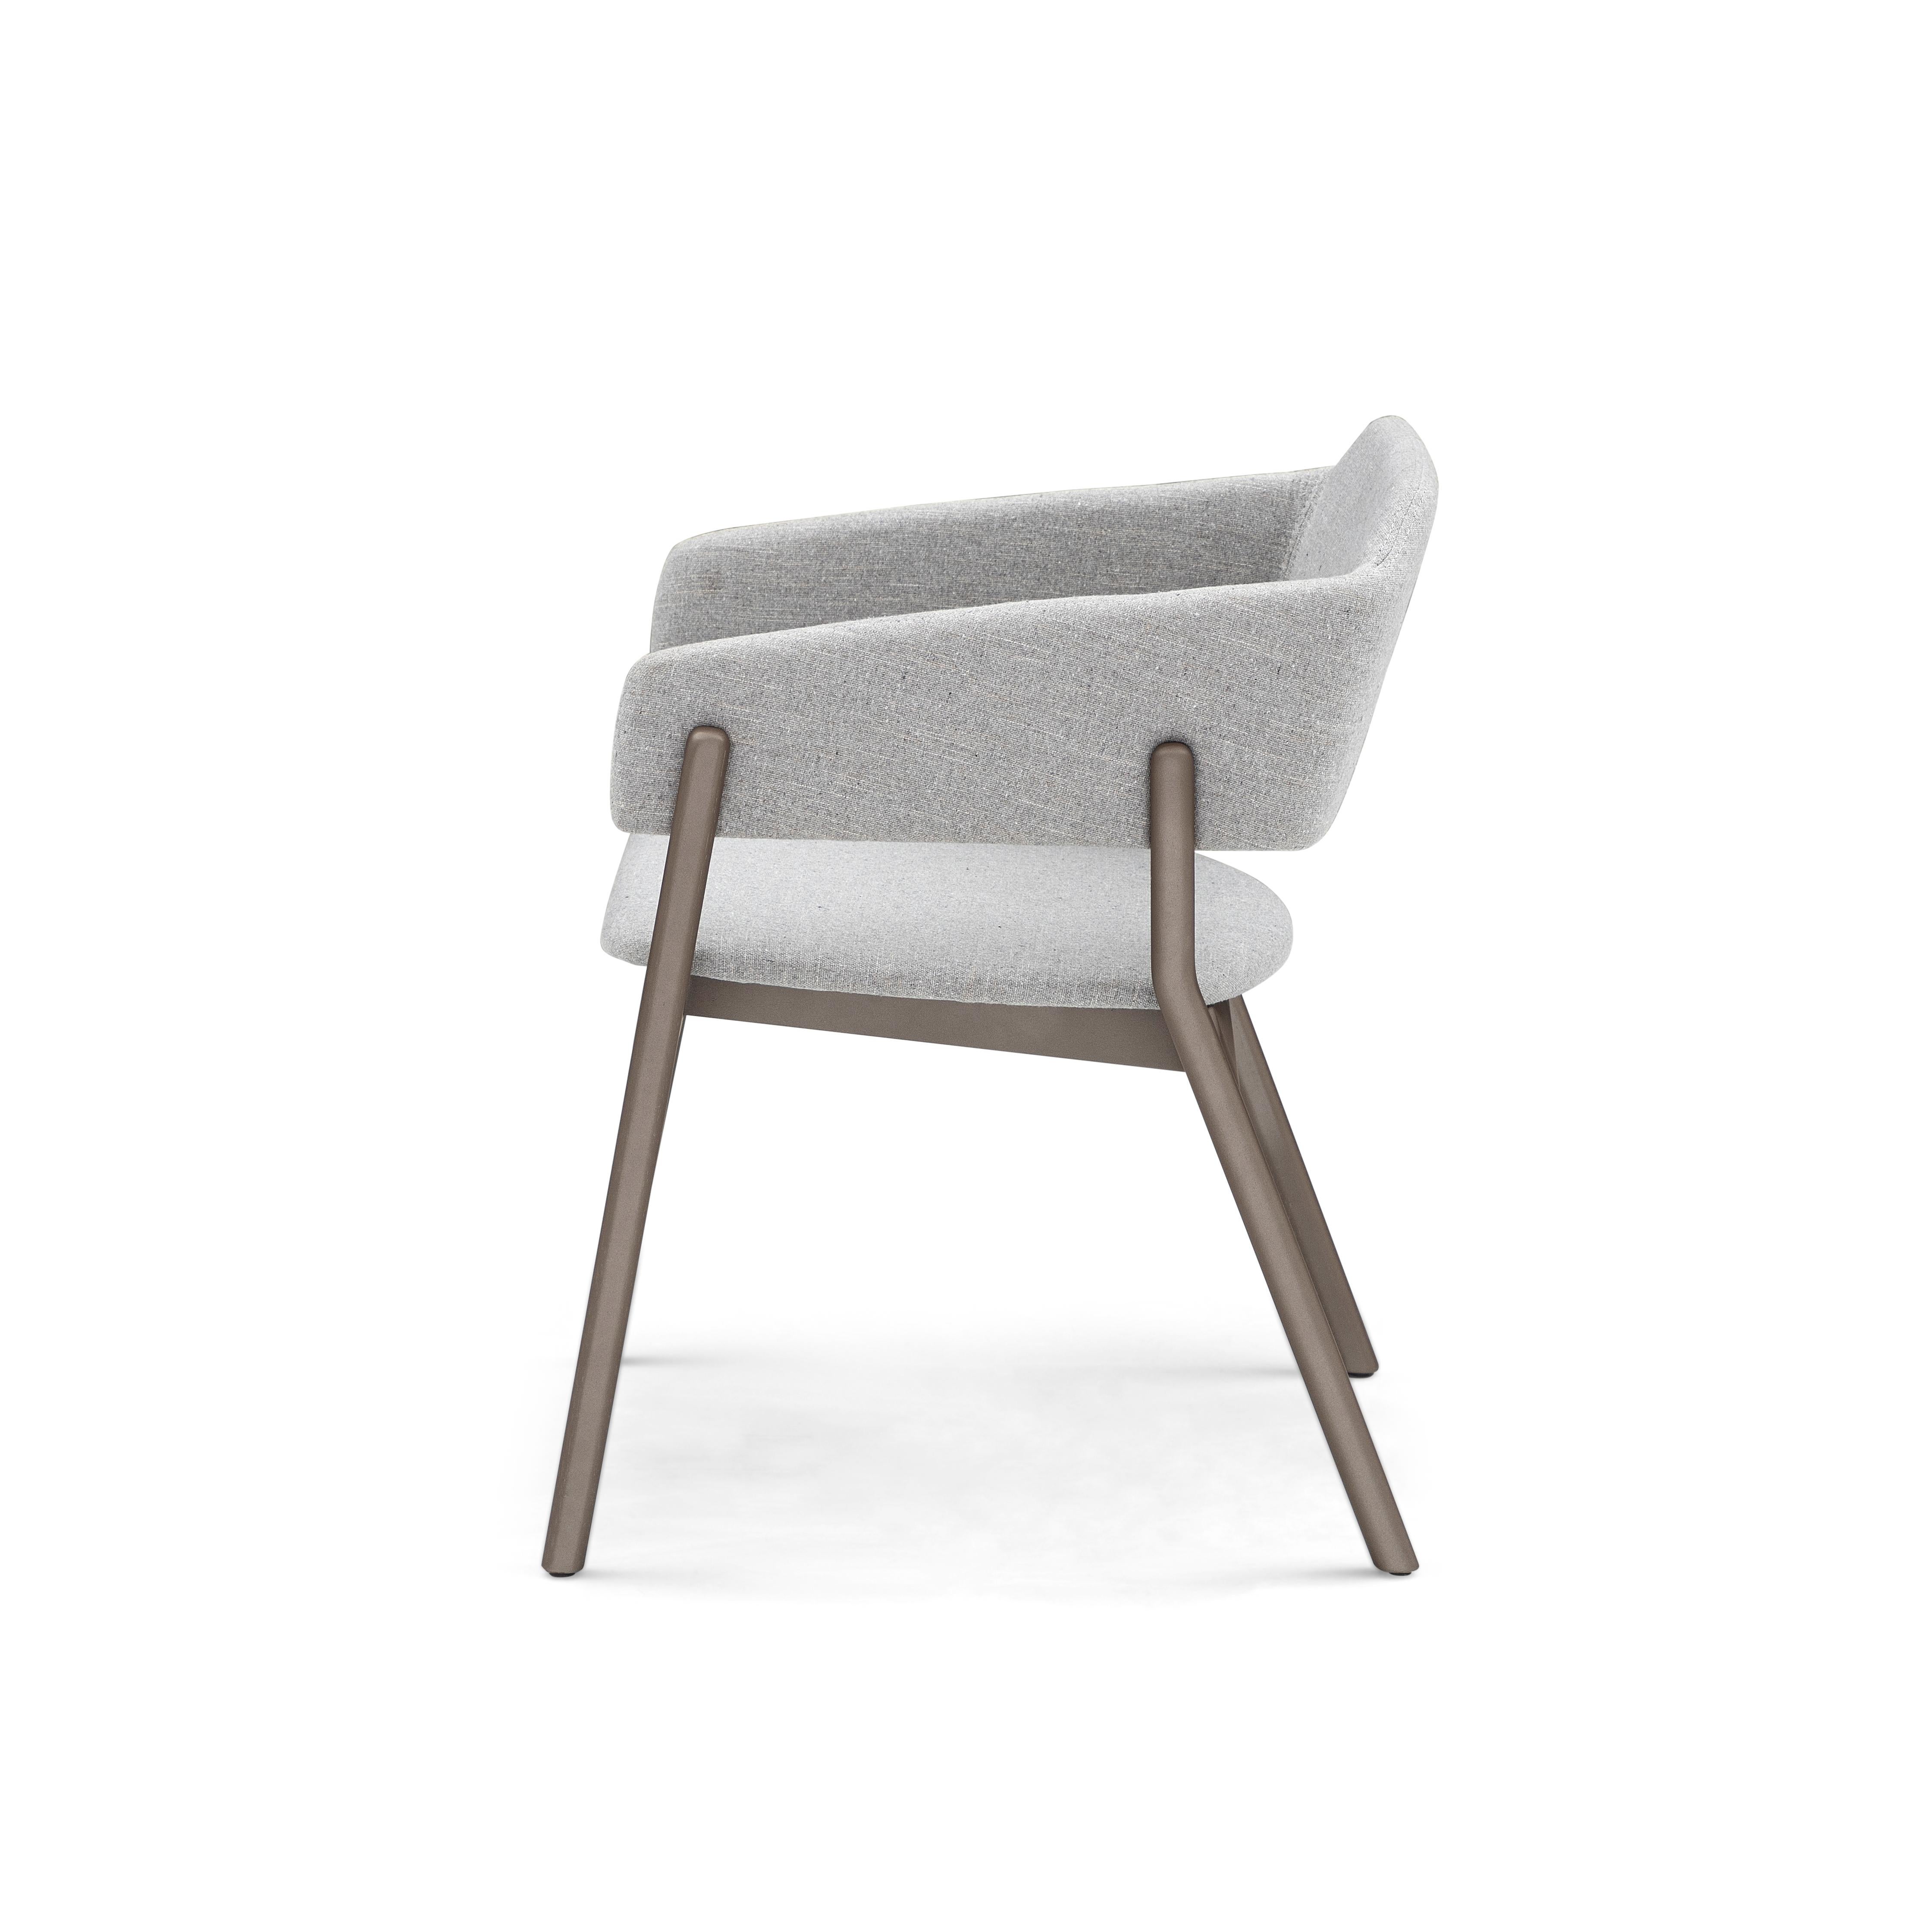 Our Uultis team has created this beautiful Stuzi dining chair to decorate your beautiful dining room table with a beautiful gray fabric and a chocolate or brown wood finish. This chair has a beautifully simple but elegant design that is going to